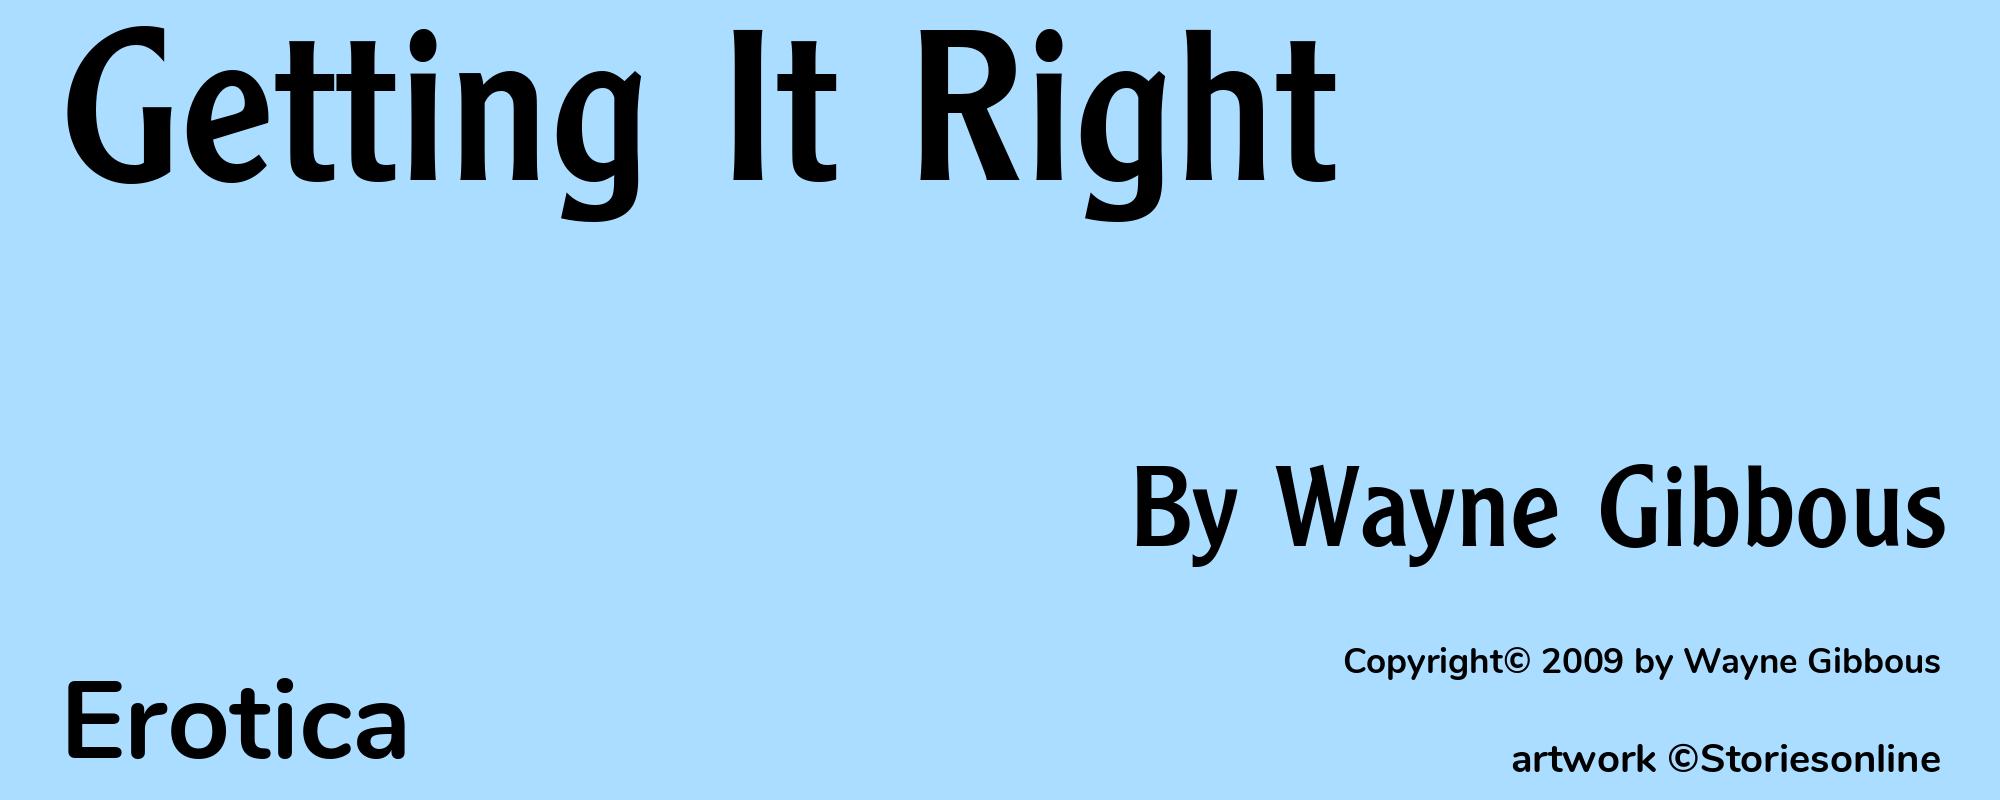 Getting It Right - Cover